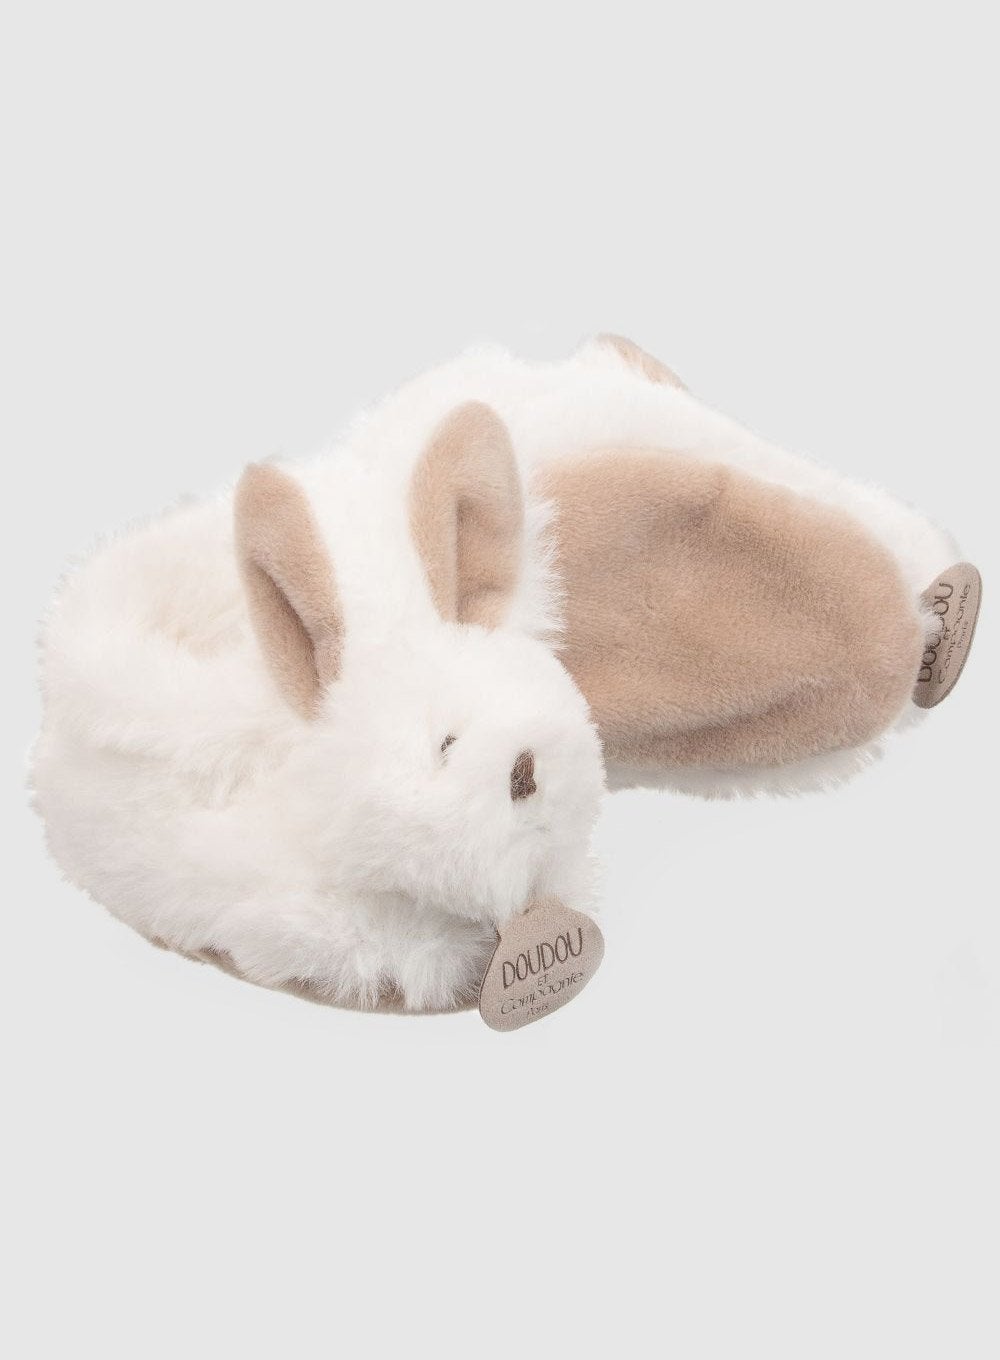 Doudou et Compagnie Booties Little Bunny Booties in Chestnut - Trotters Childrenswear